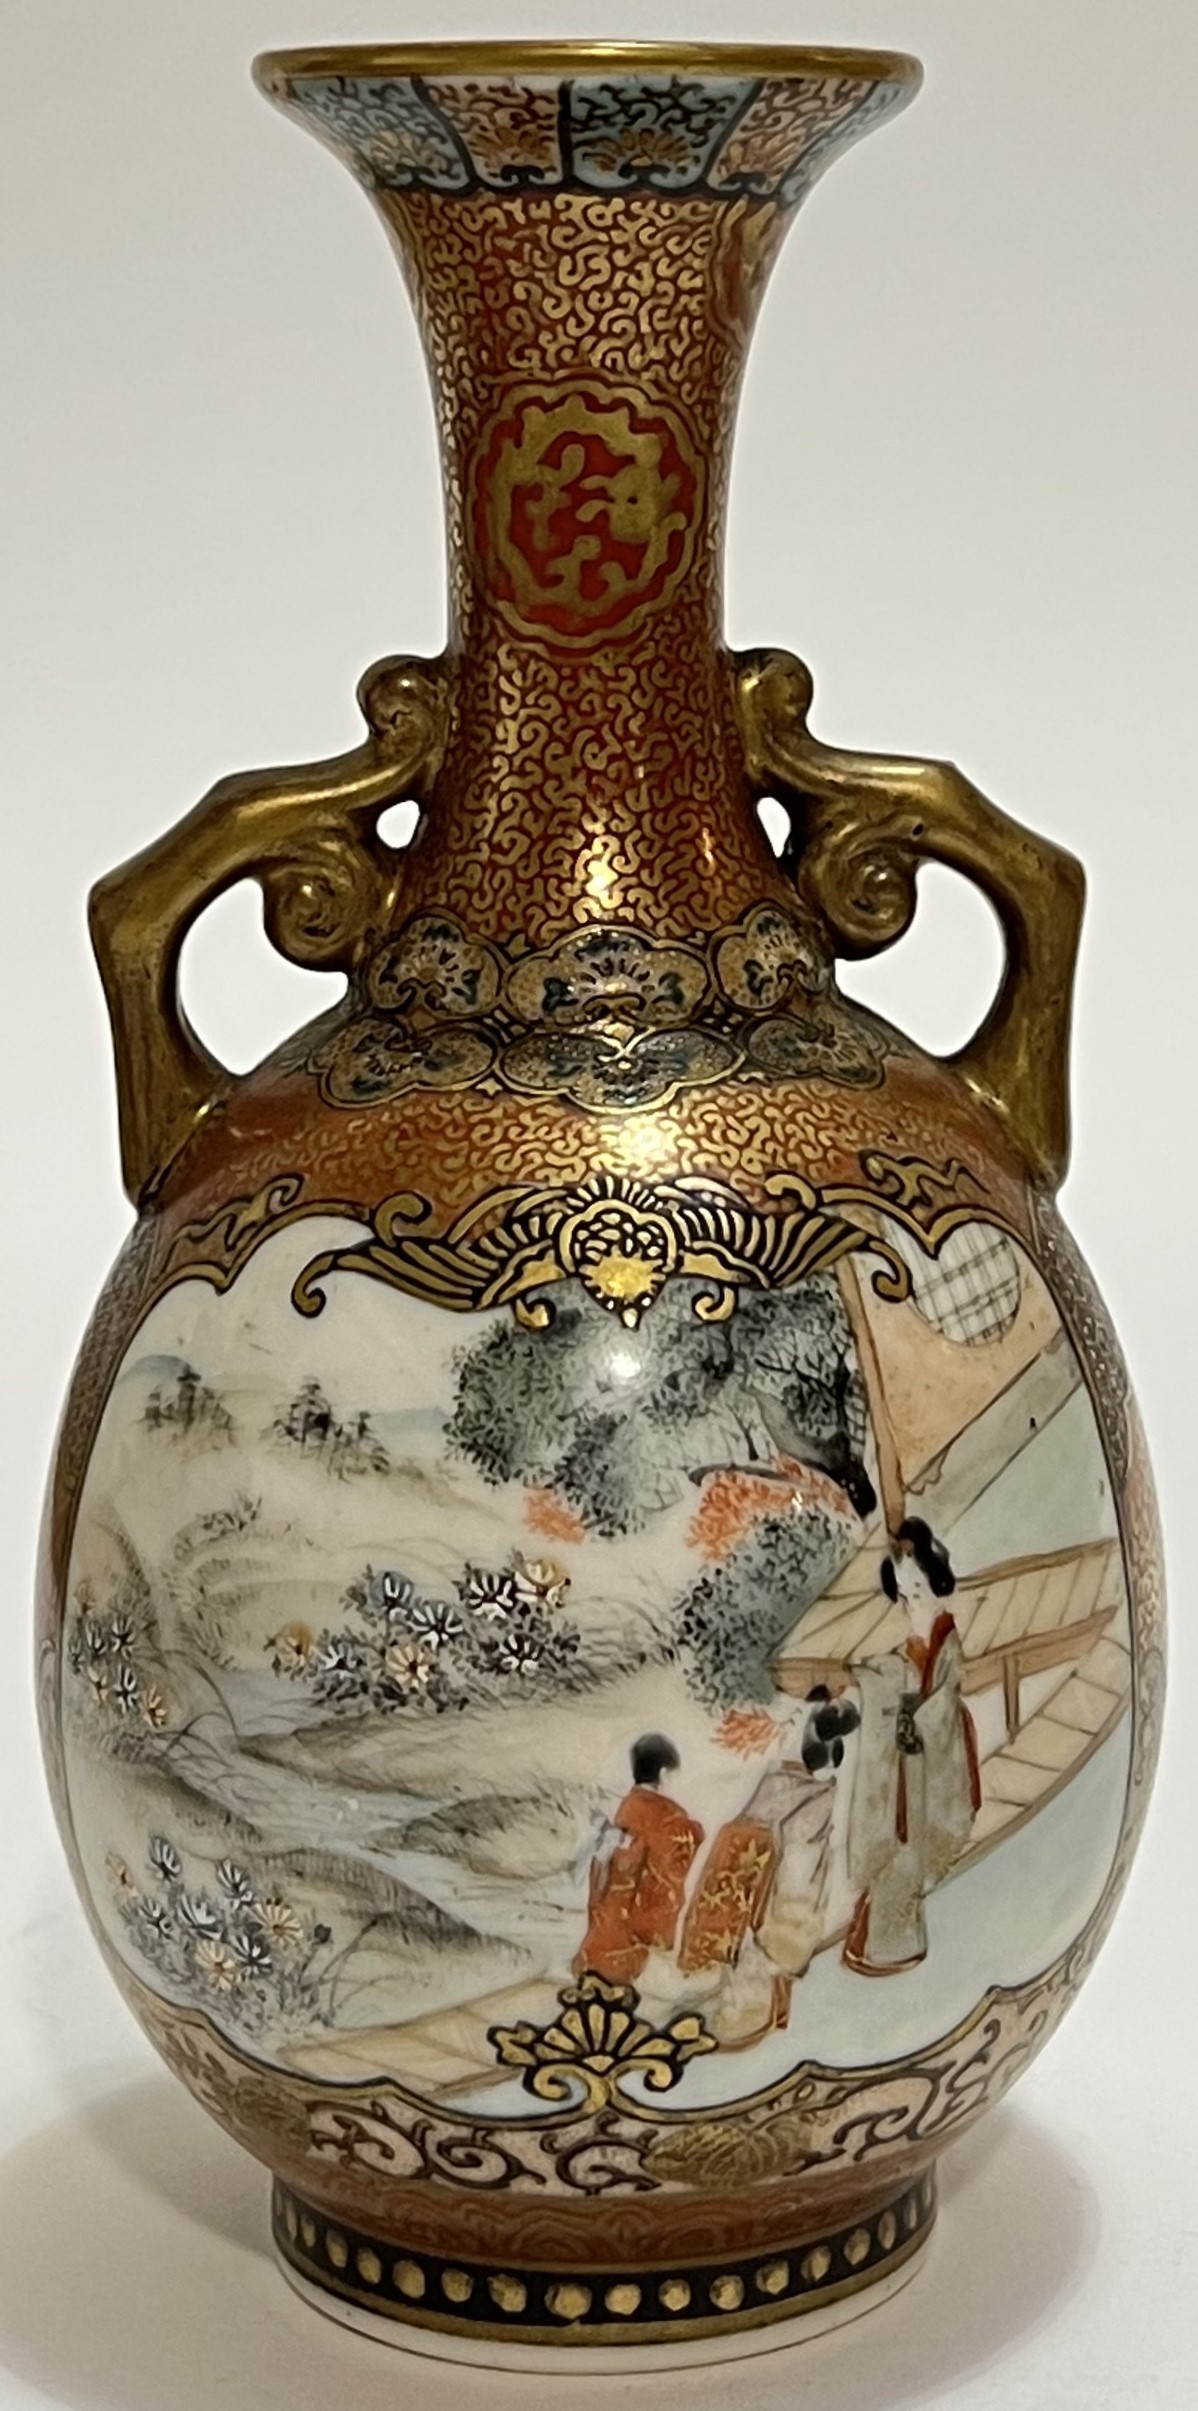 A Japanese Kutani porcelain twin-handled vase decorated in the typical manner with orange and gilt b